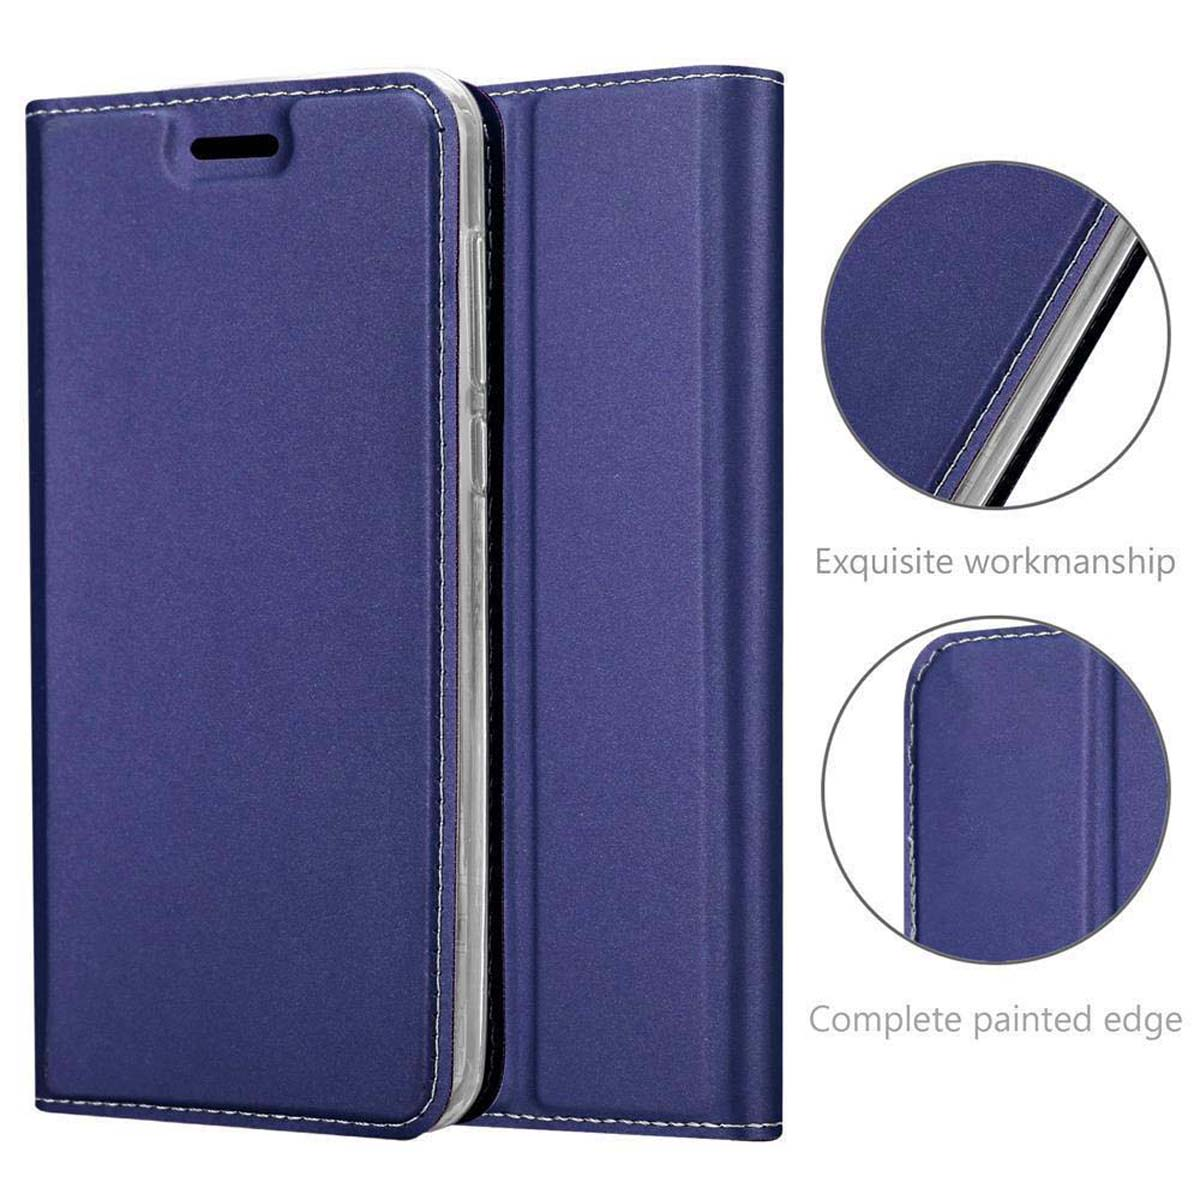 Bookcover, BLAU Book CADORABO CLASSY Style, Huawei, ASCEND Handyhülle P7, DUNKEL Classy